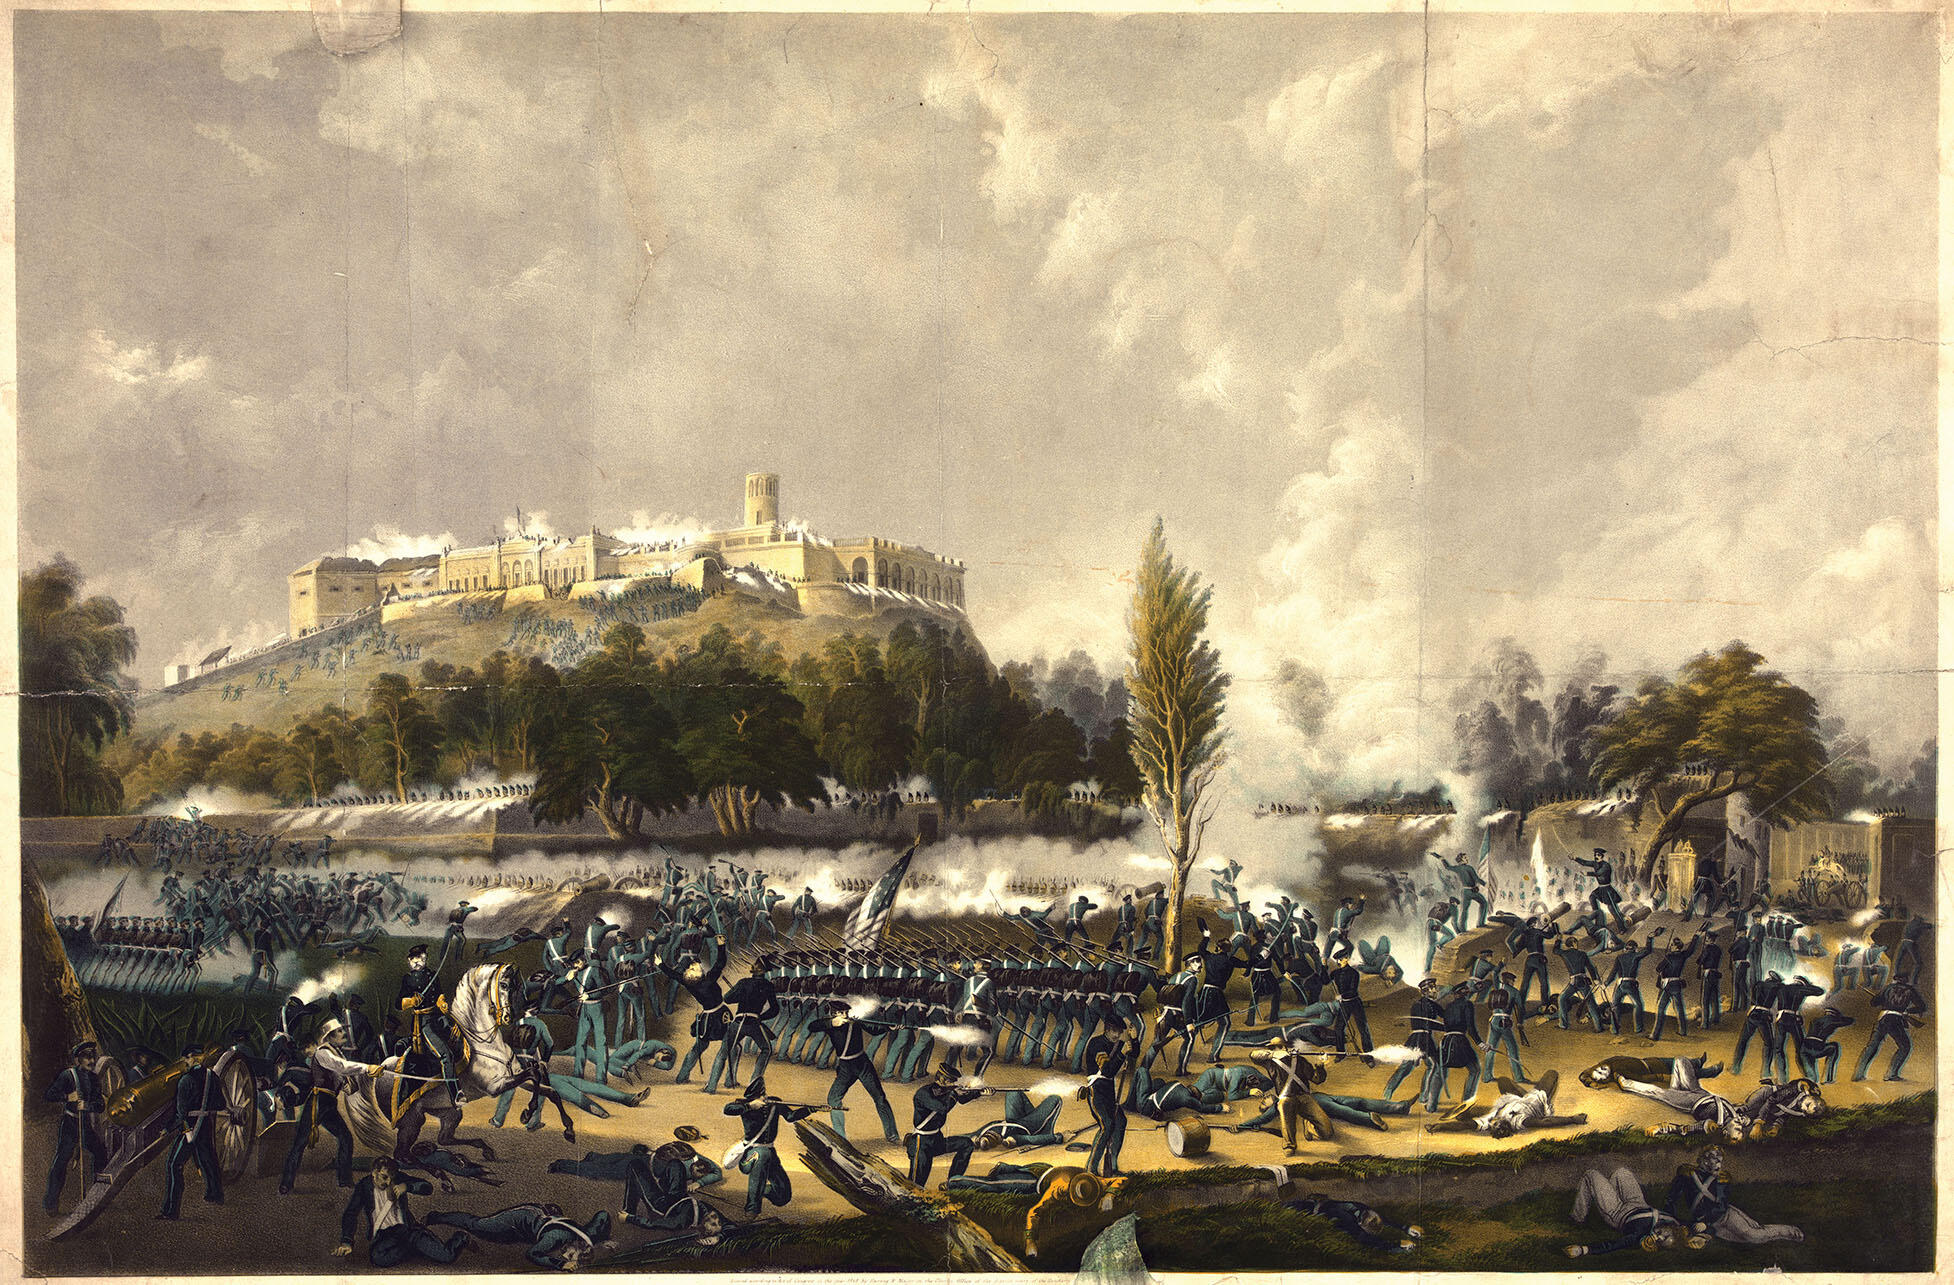 A painting shows soldiers in battle during the 1847 storming of Chapultepec during the U.S. invasion of Mexico. (Image by N. Currier of painting by Walker/Photo from Library of Congress.)